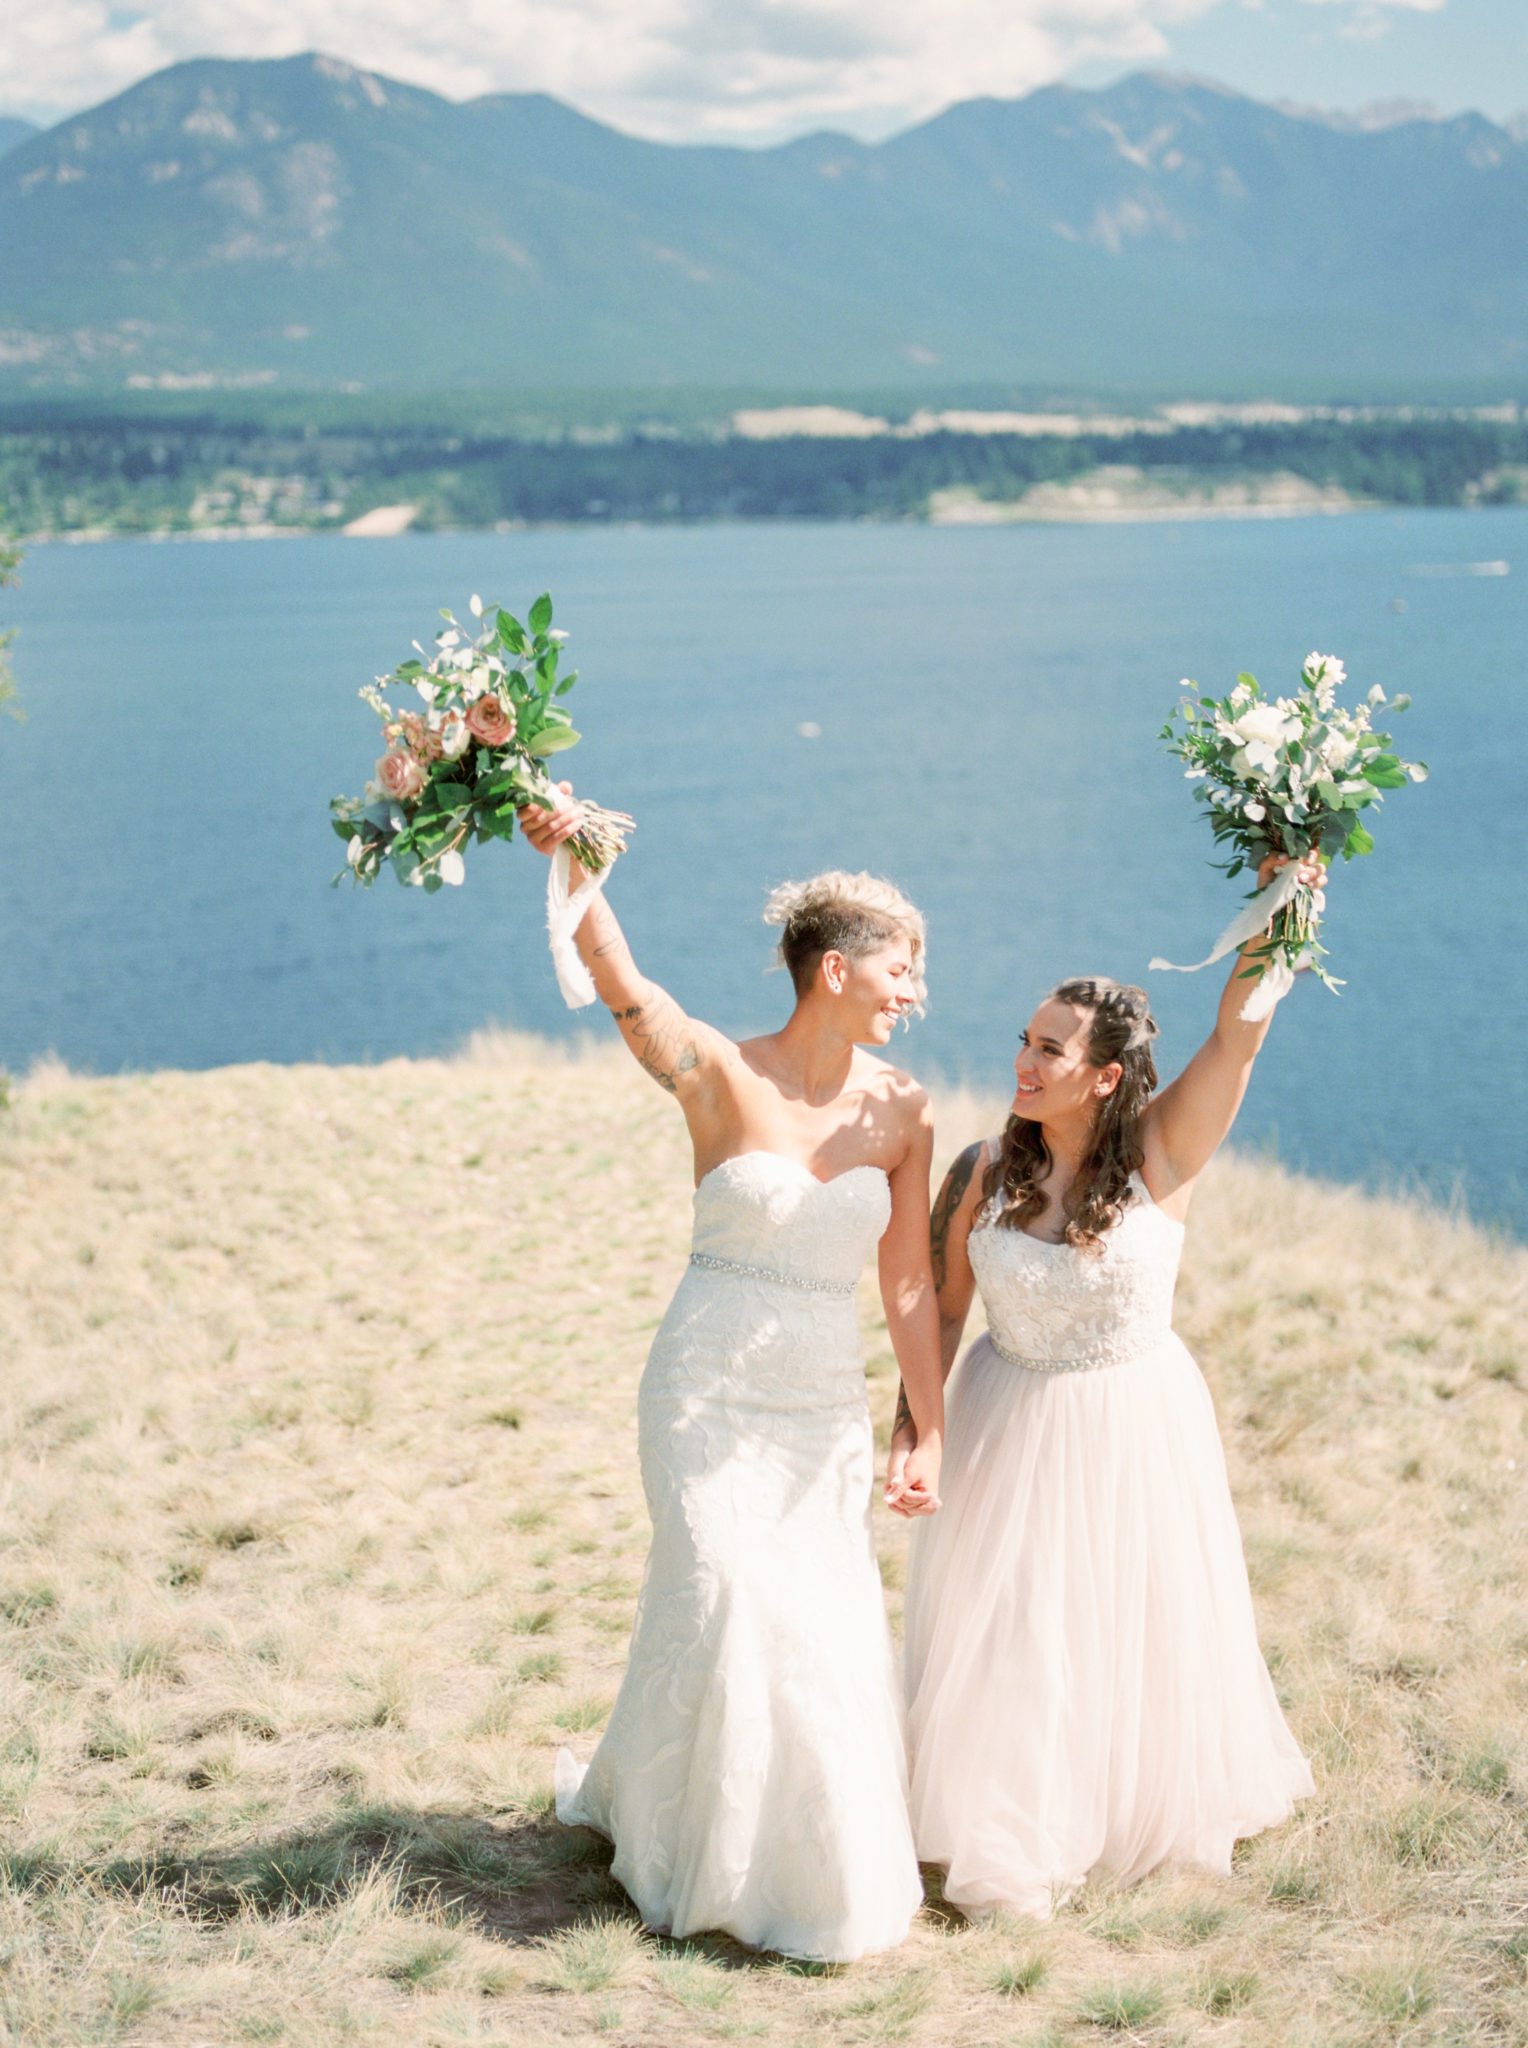 You'll Love the Scenic Views in this Bright and Airy Invermere Wedding Ceremony